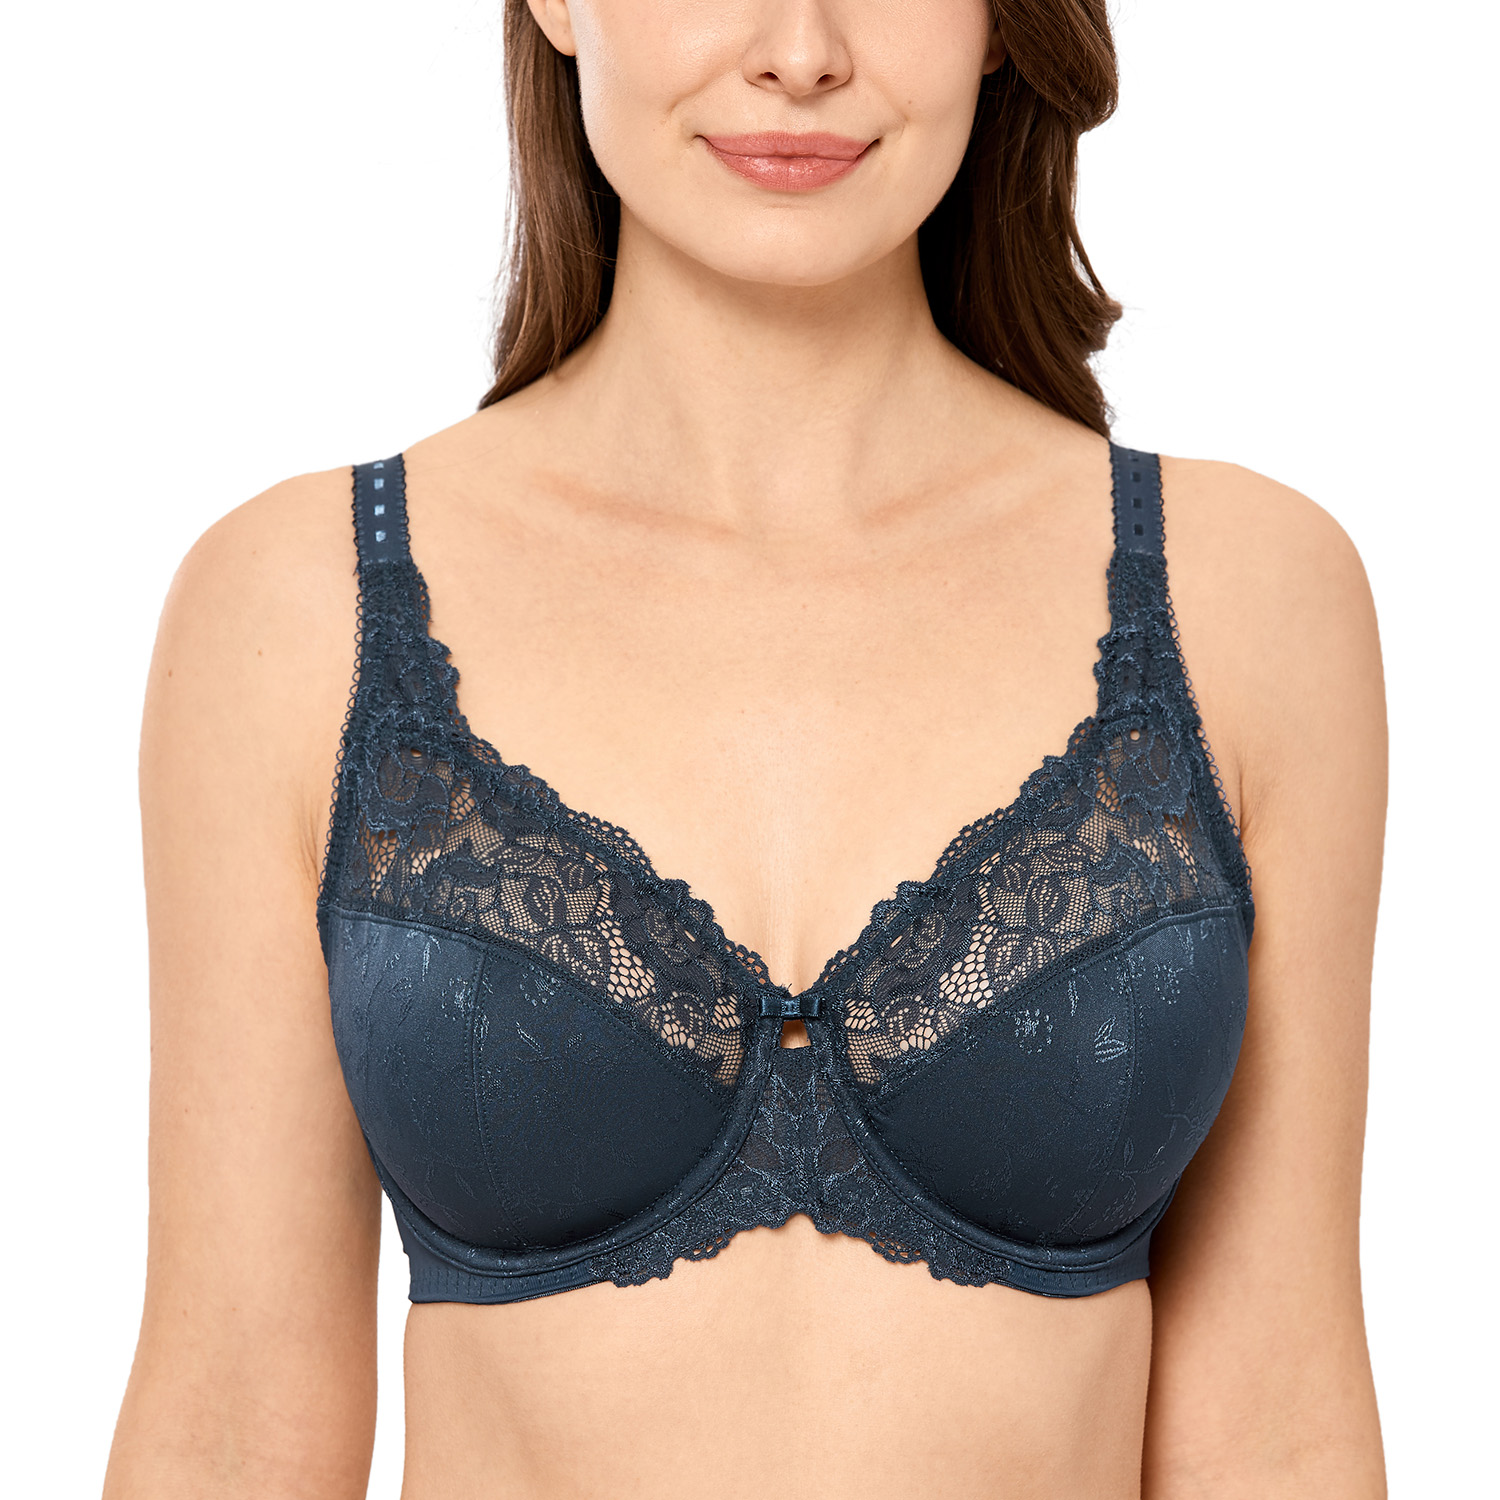 Delimira Women's Non Padded Full Coverage Support Sheer Lace Underwired Bra